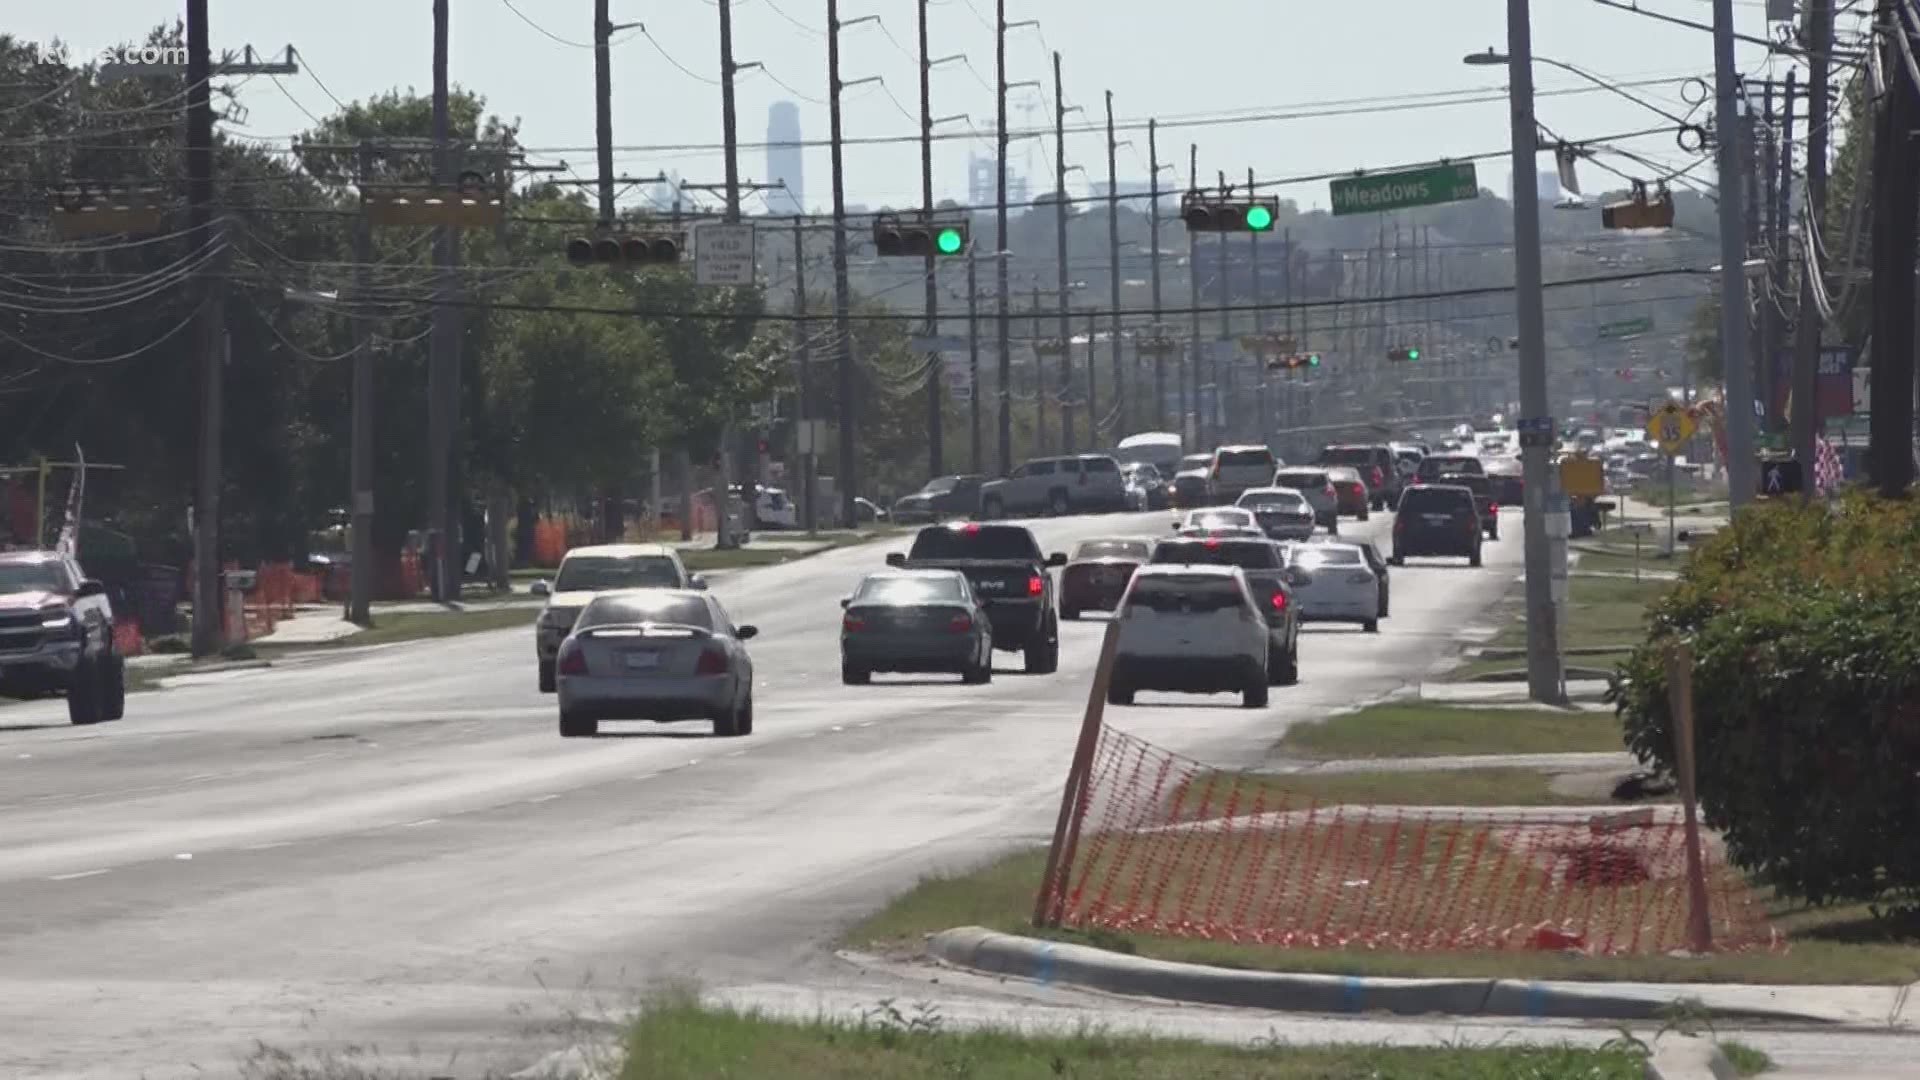 The City of Austin has been working to install traffic signals, crosswalks and more at four intersections along a stretch N. Lamar Boulevard.